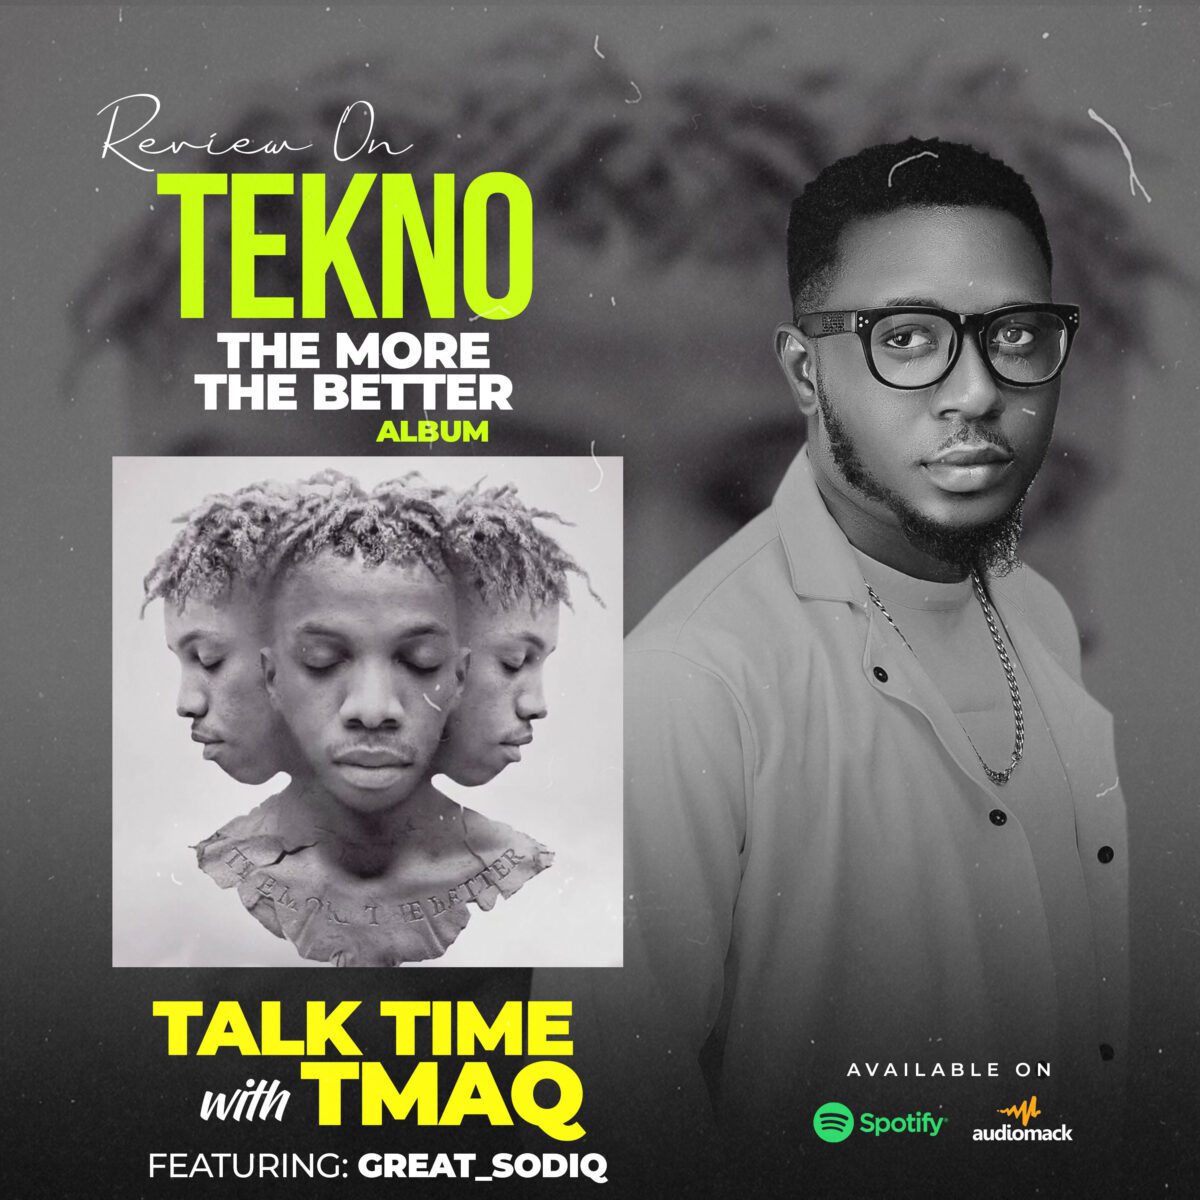 Talk Time With Tmaq - REVIEW OF Tekno album the more the better Feat. Great Sodiq